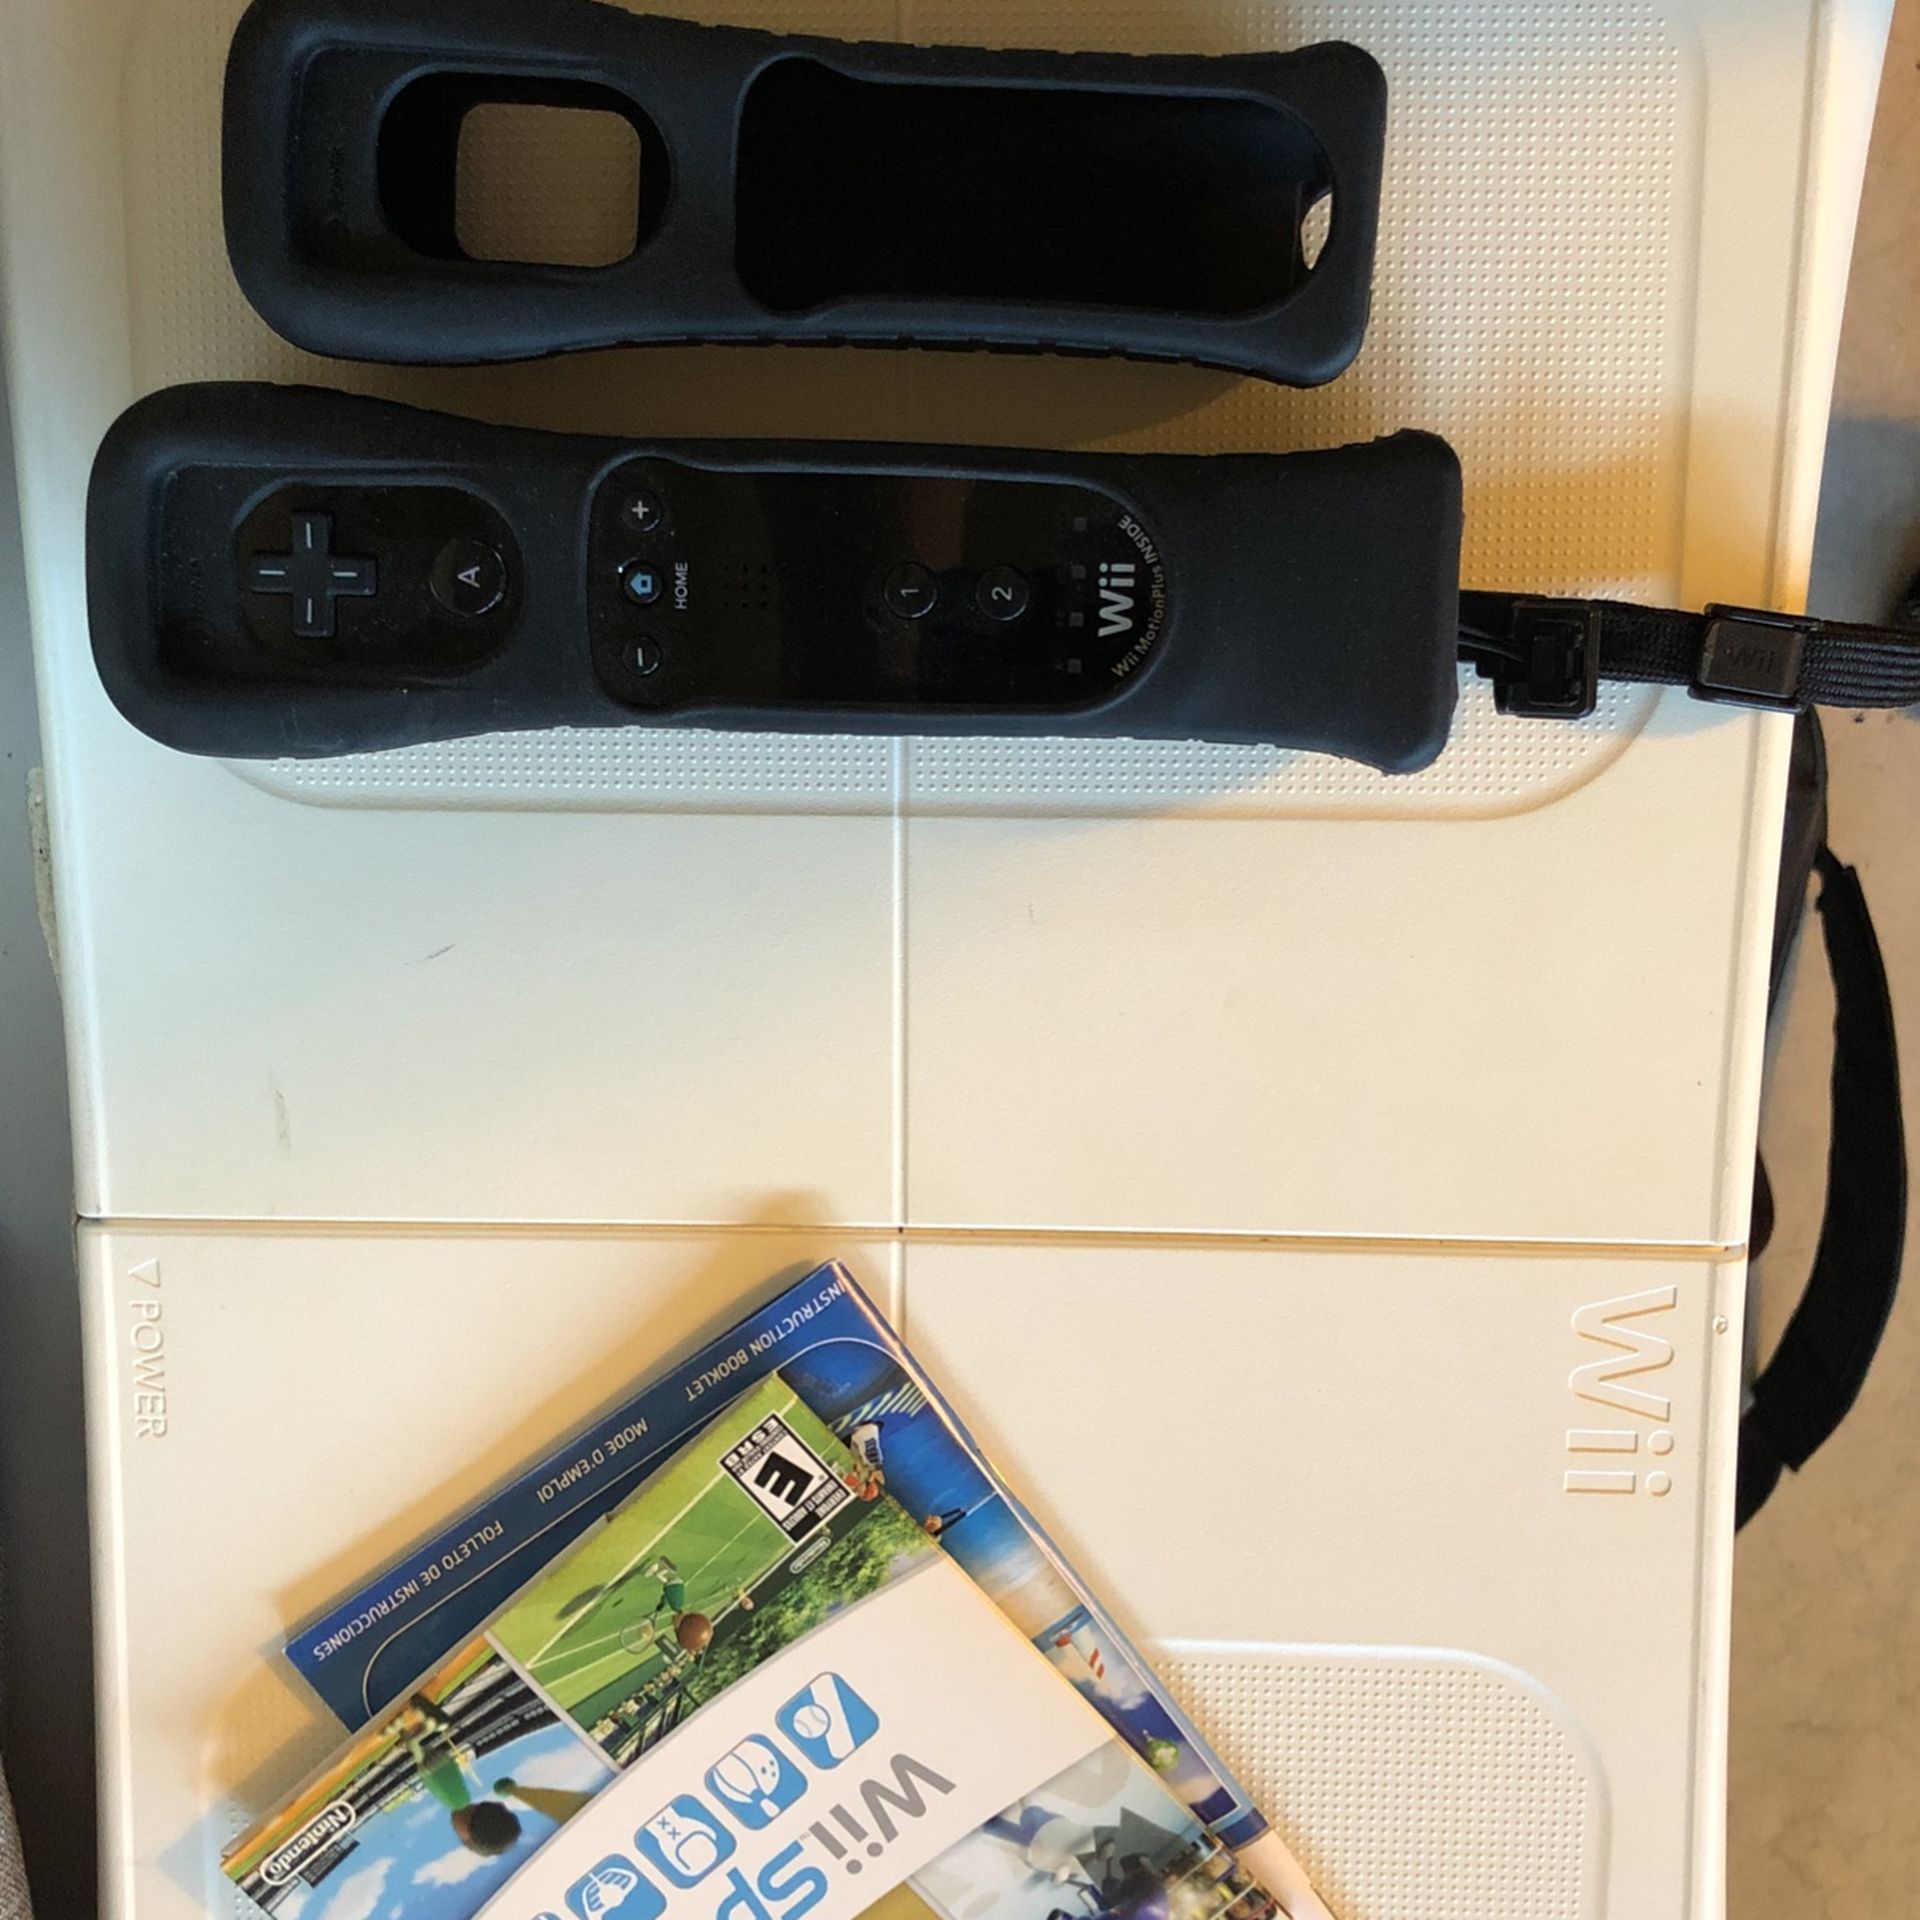 Wii Fit Board, Game, and Remote